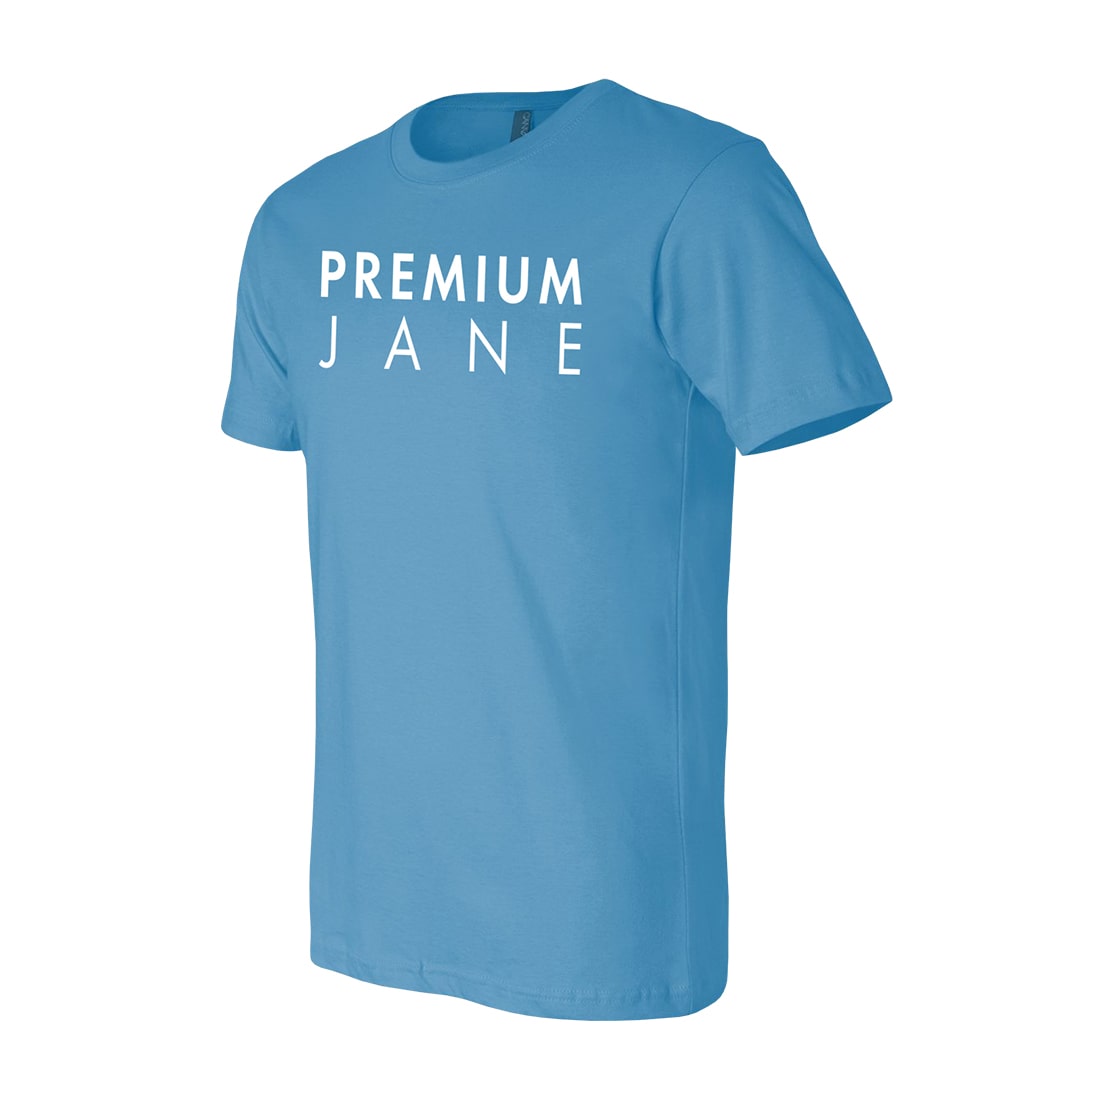 pj-product-page-t-shirt